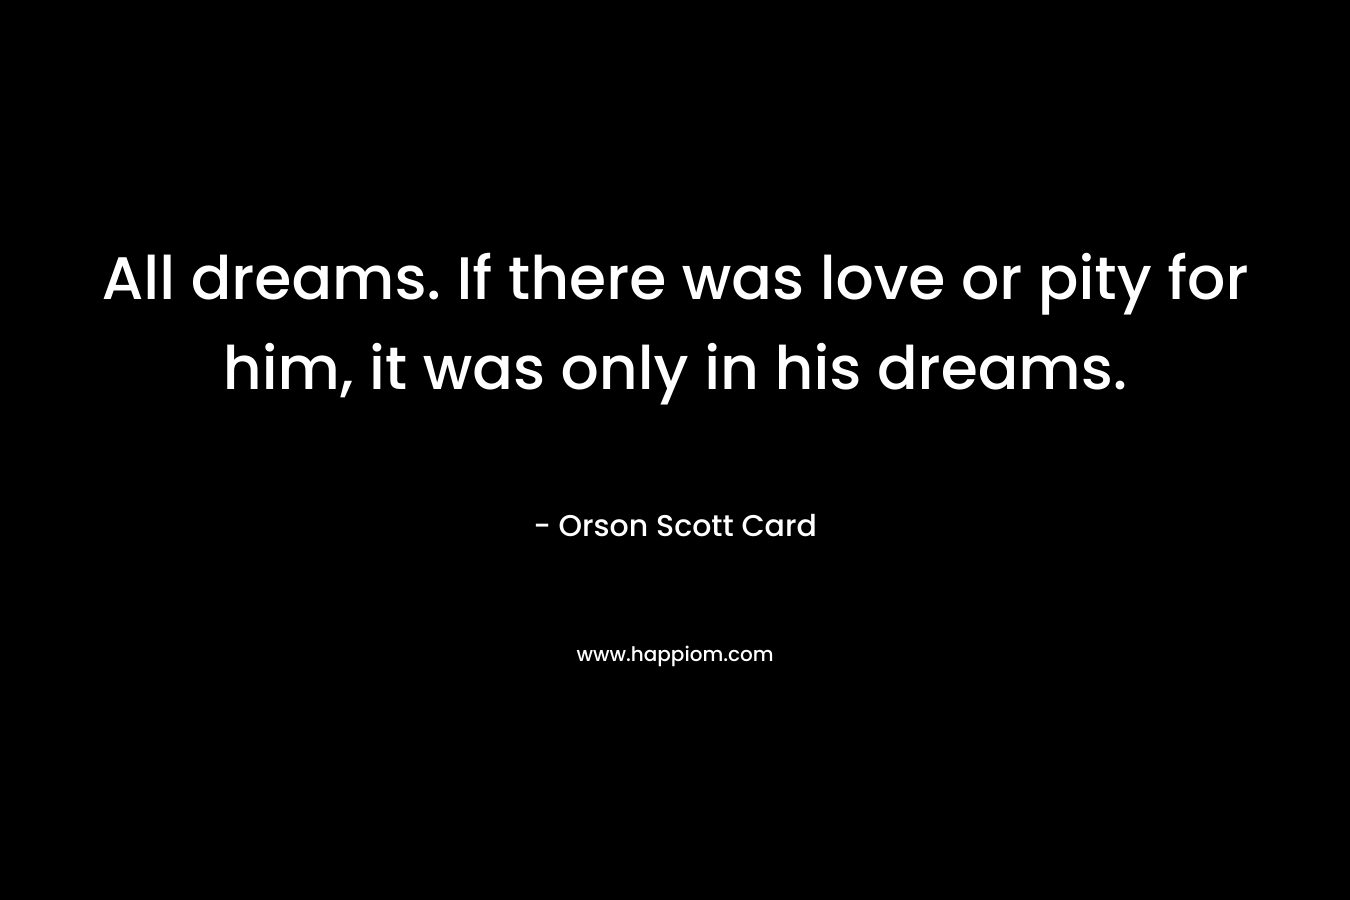 All dreams. If there was love or pity for him, it was only in his dreams. – Orson Scott Card